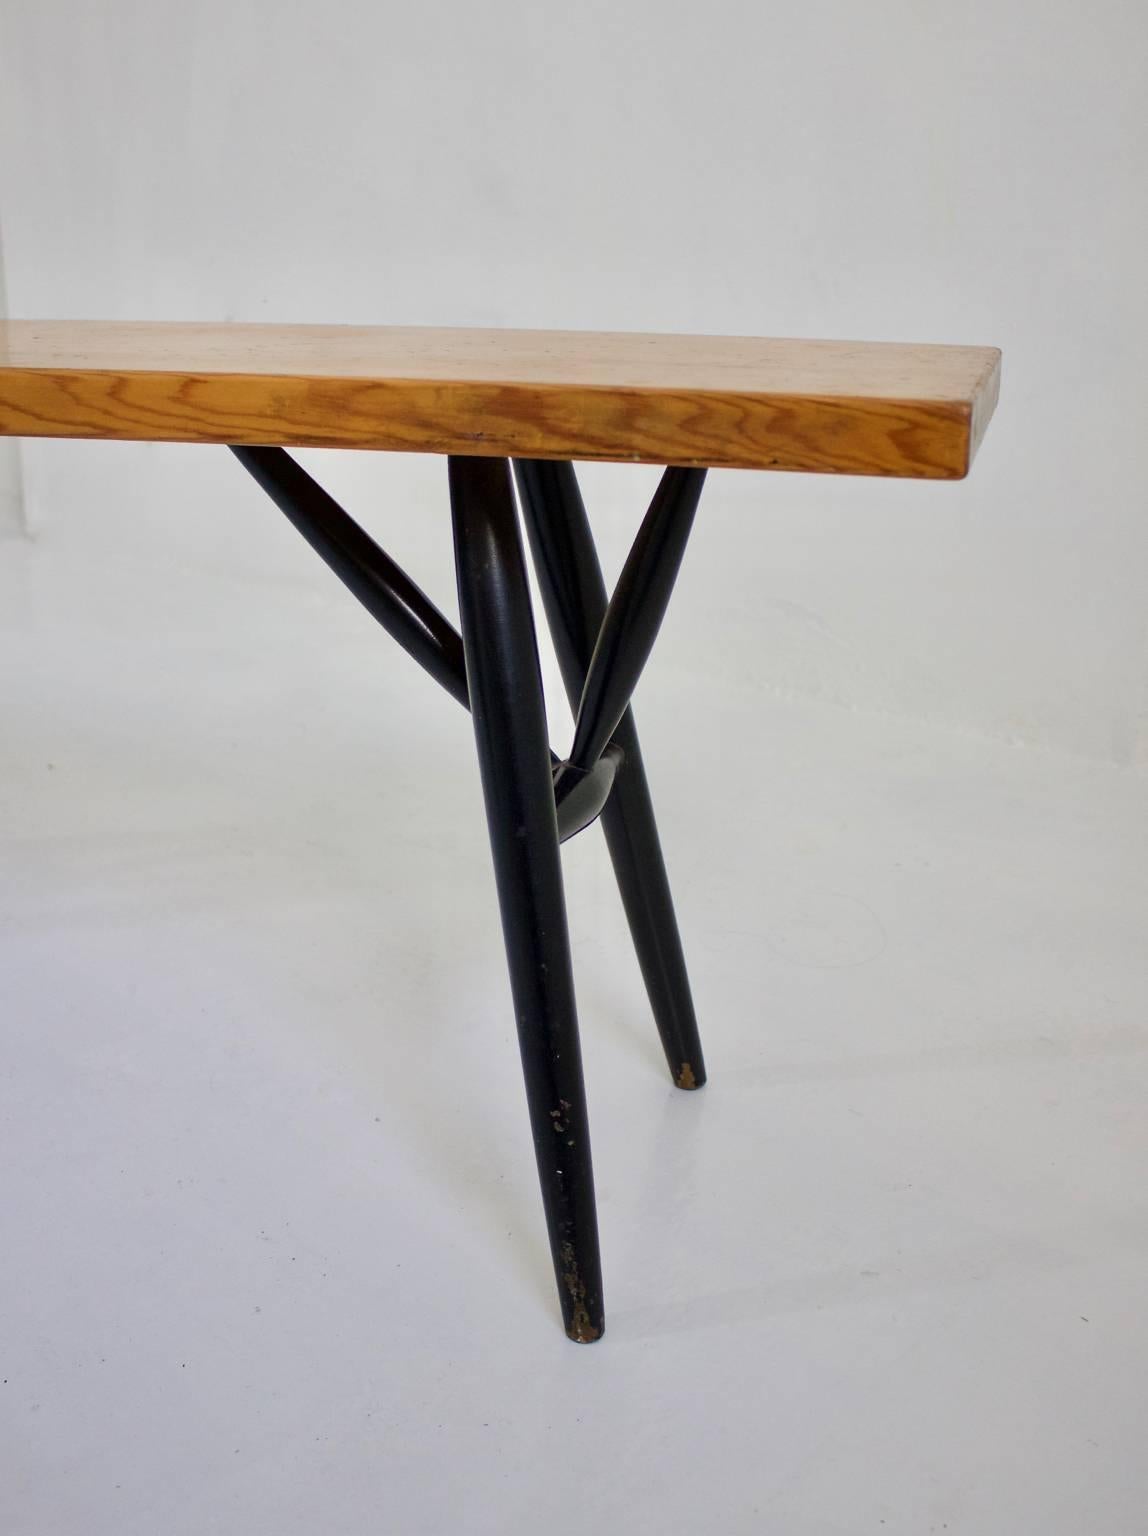 Pirkka pine bench by Ilmari Tapiovaara for Laukaan Puu, Finland, 1950s.

A simple piece in good vintage condition with signs of wear in line with age and use as one might expect. The top has a nice patina, with lots of surface wear, and there are